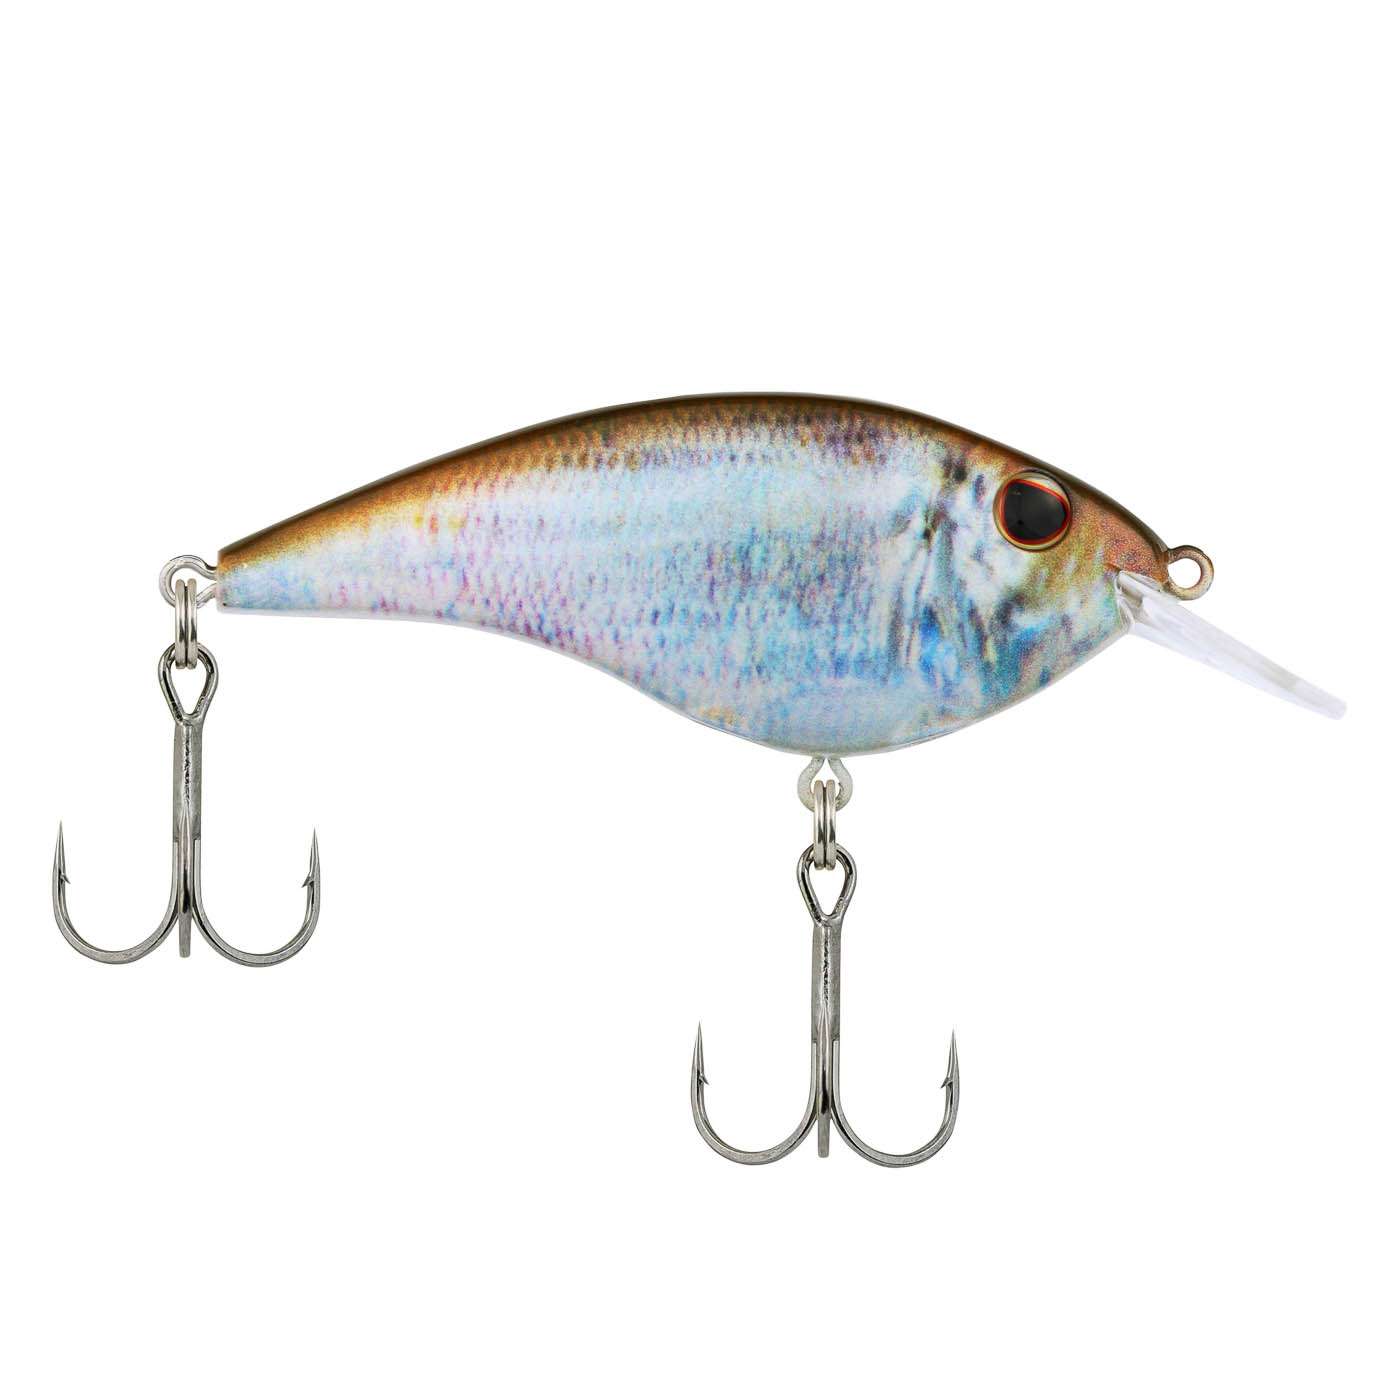 <p><strong>Berkley Frittside</strong></p><p>The Frittside adds new high-definition HD Tru Colors to the lineup. Those are HD Threadfih Shad, HD Blueback Herring, HD Bluegill, HD Brown Craw, HD Green Craw and HD Blue Craw. The Frittside features the same proven action that won David Fritts the Bassmaster Classic. Delivering proven balsa actions with the durability and casting performance of a plastic bait, the Frittside is a key bait for tough conditions when fish are sluggish or heavily pressured. Available September 2021. $9.99. <a href=